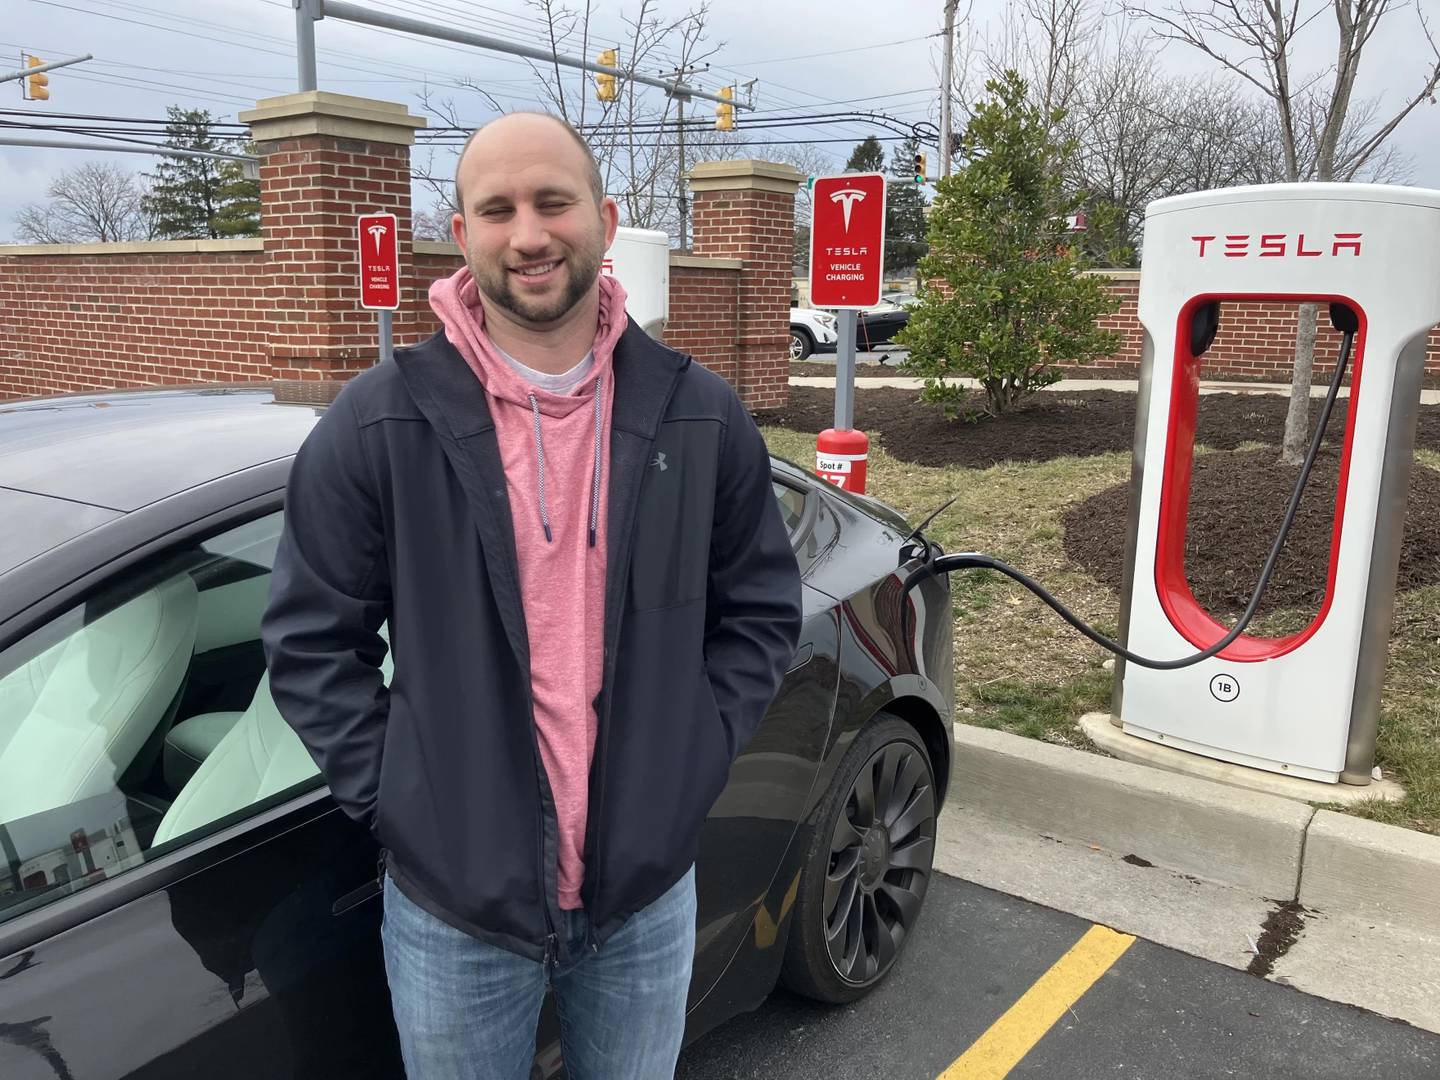 Westminster resident and electric vehicle owner Aaron Matty commutes to his job in Towson.